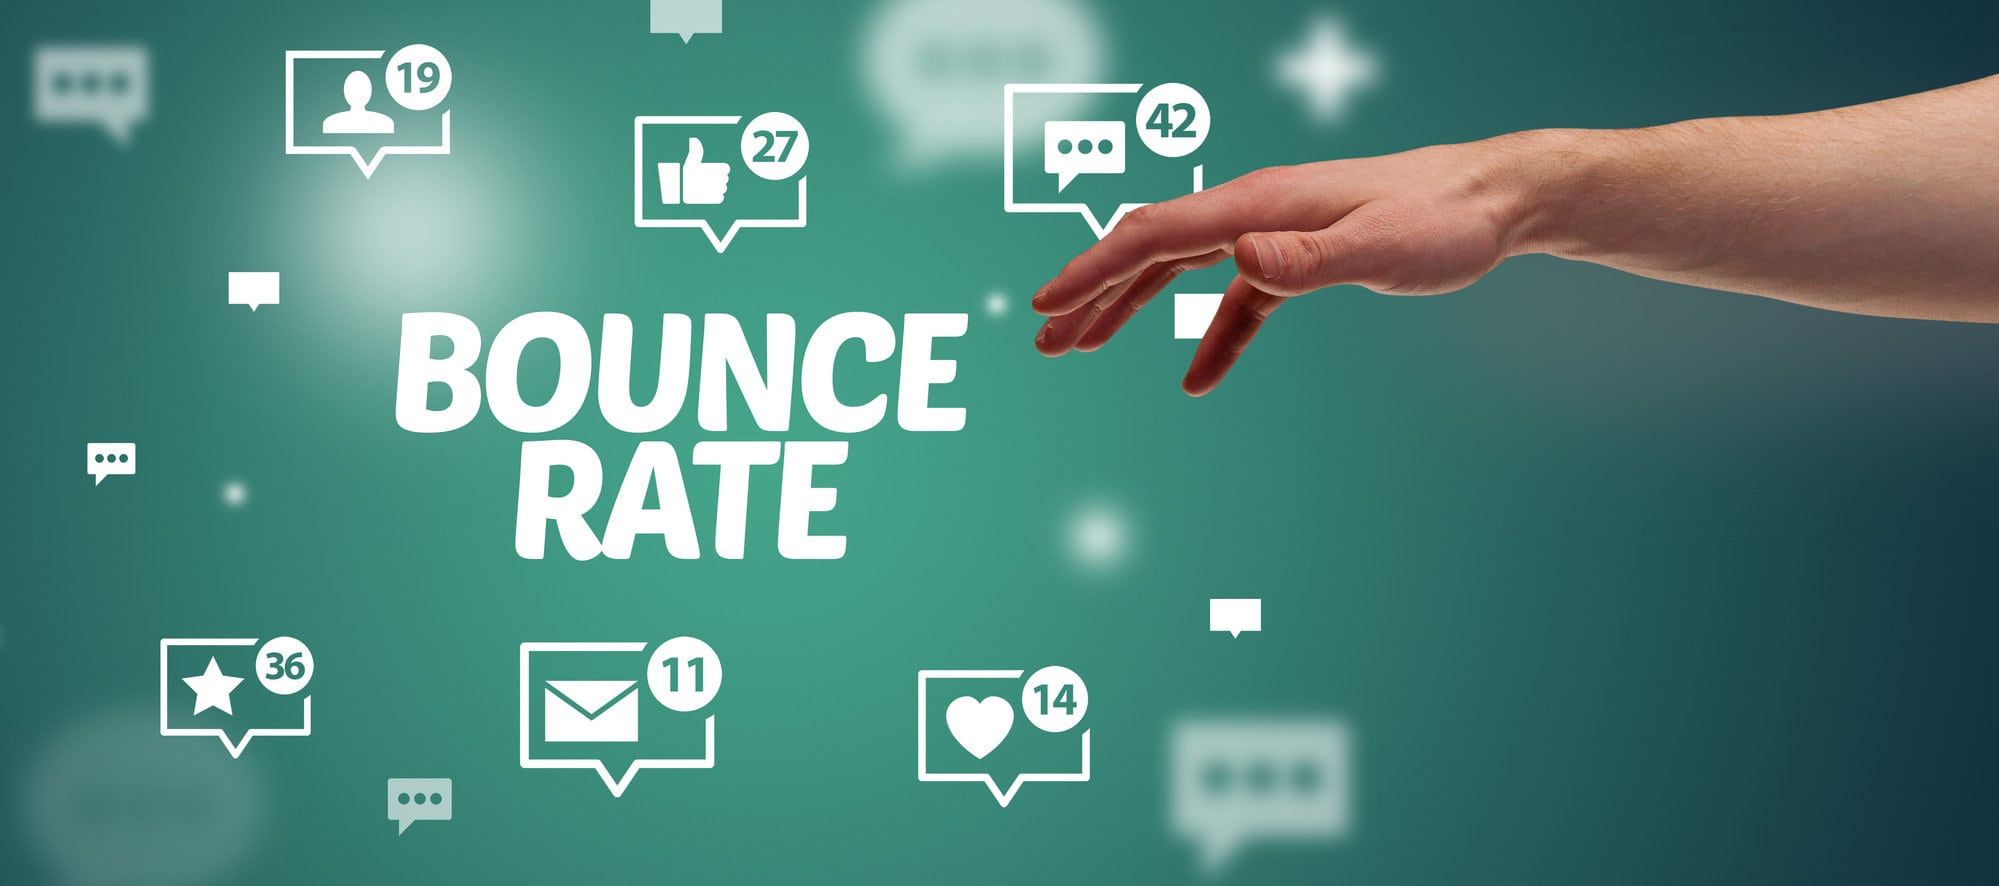 A hand reaching for the word bounce rate on a green background, demystifying its meaning.